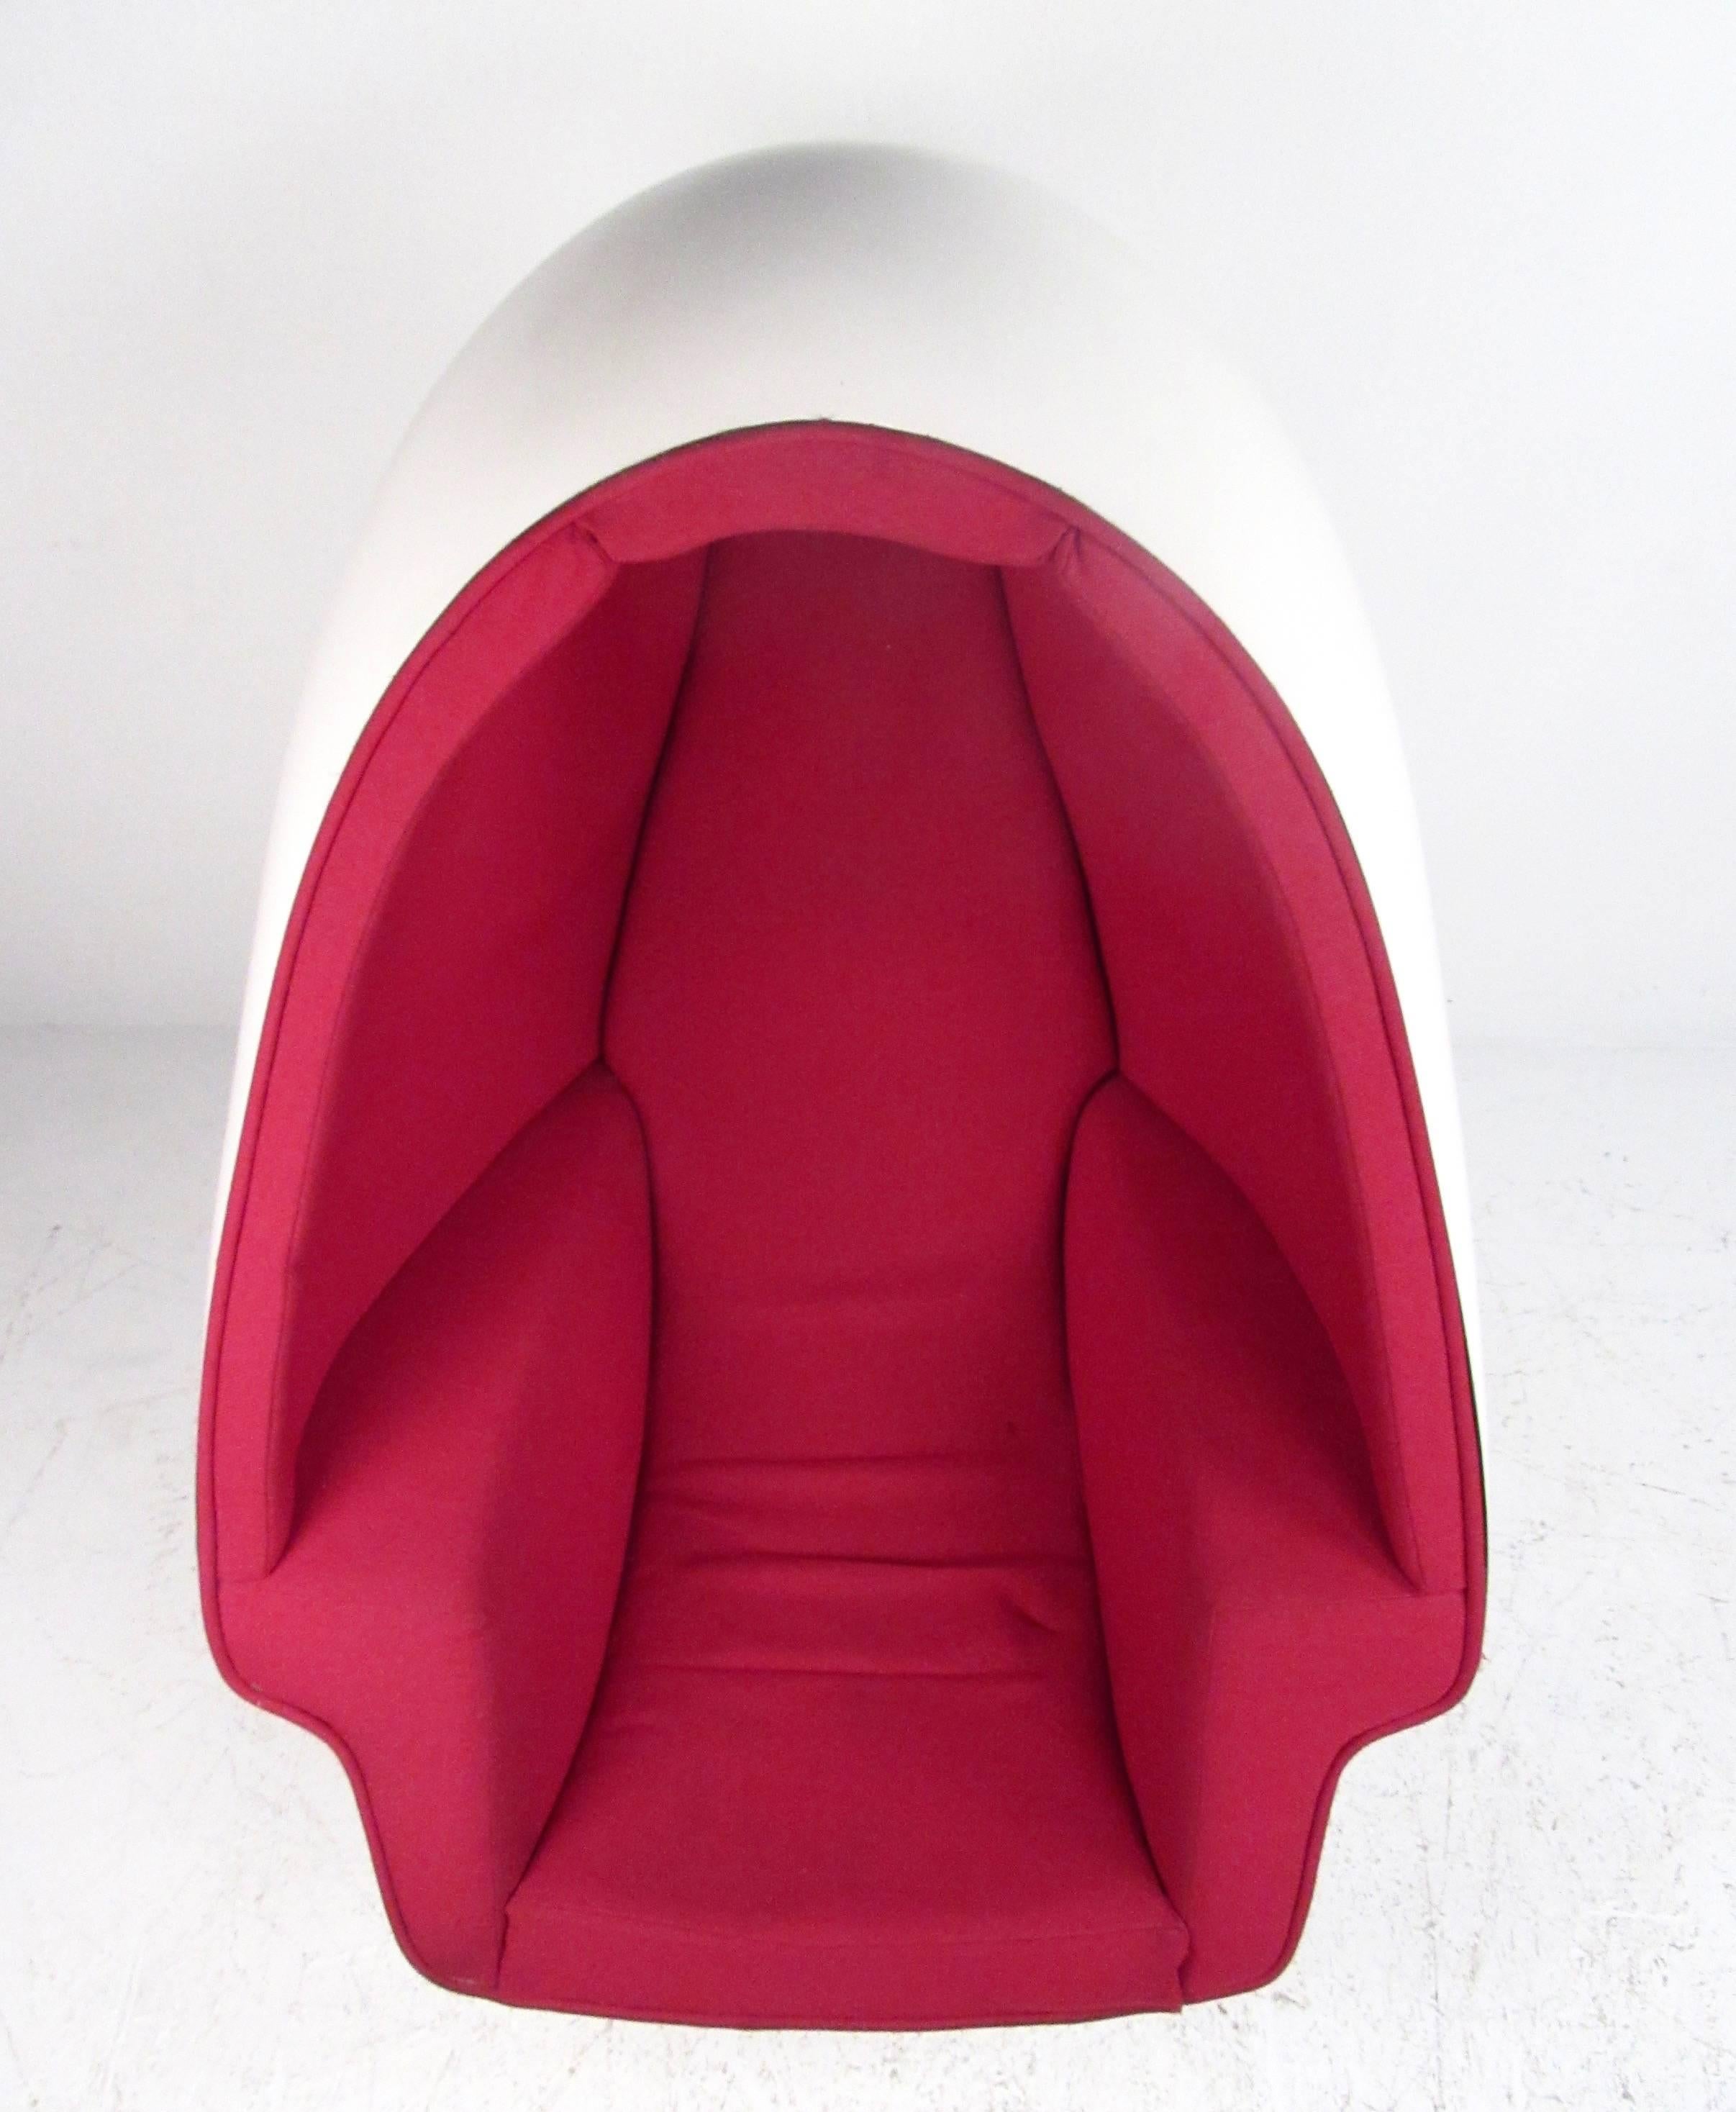 lee west egg chair